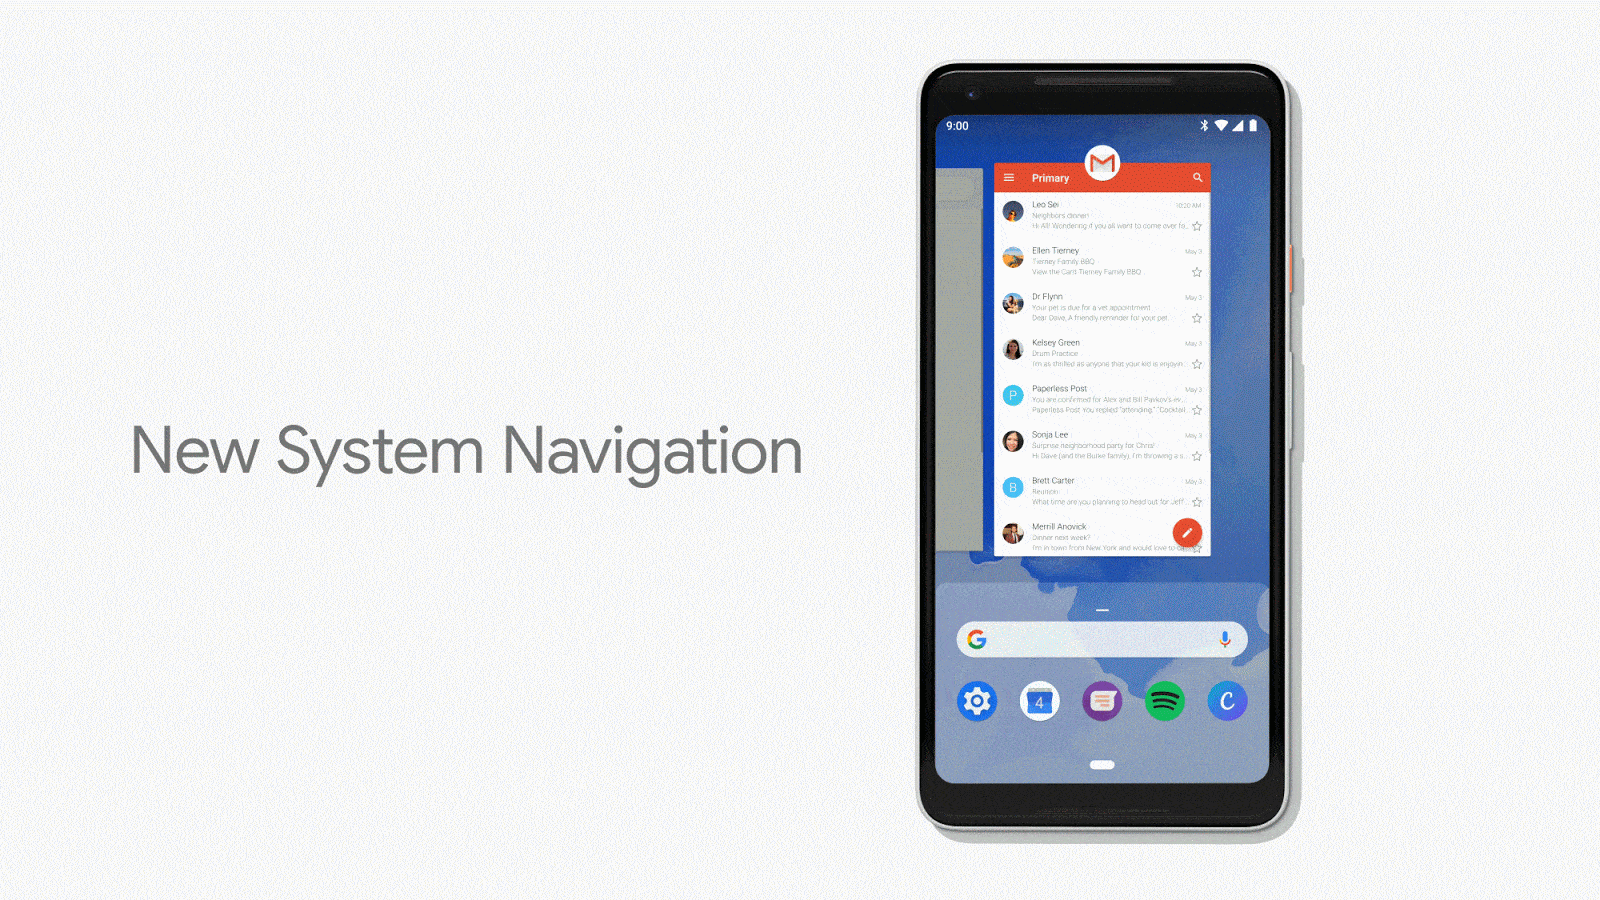 New system navigation in Android P